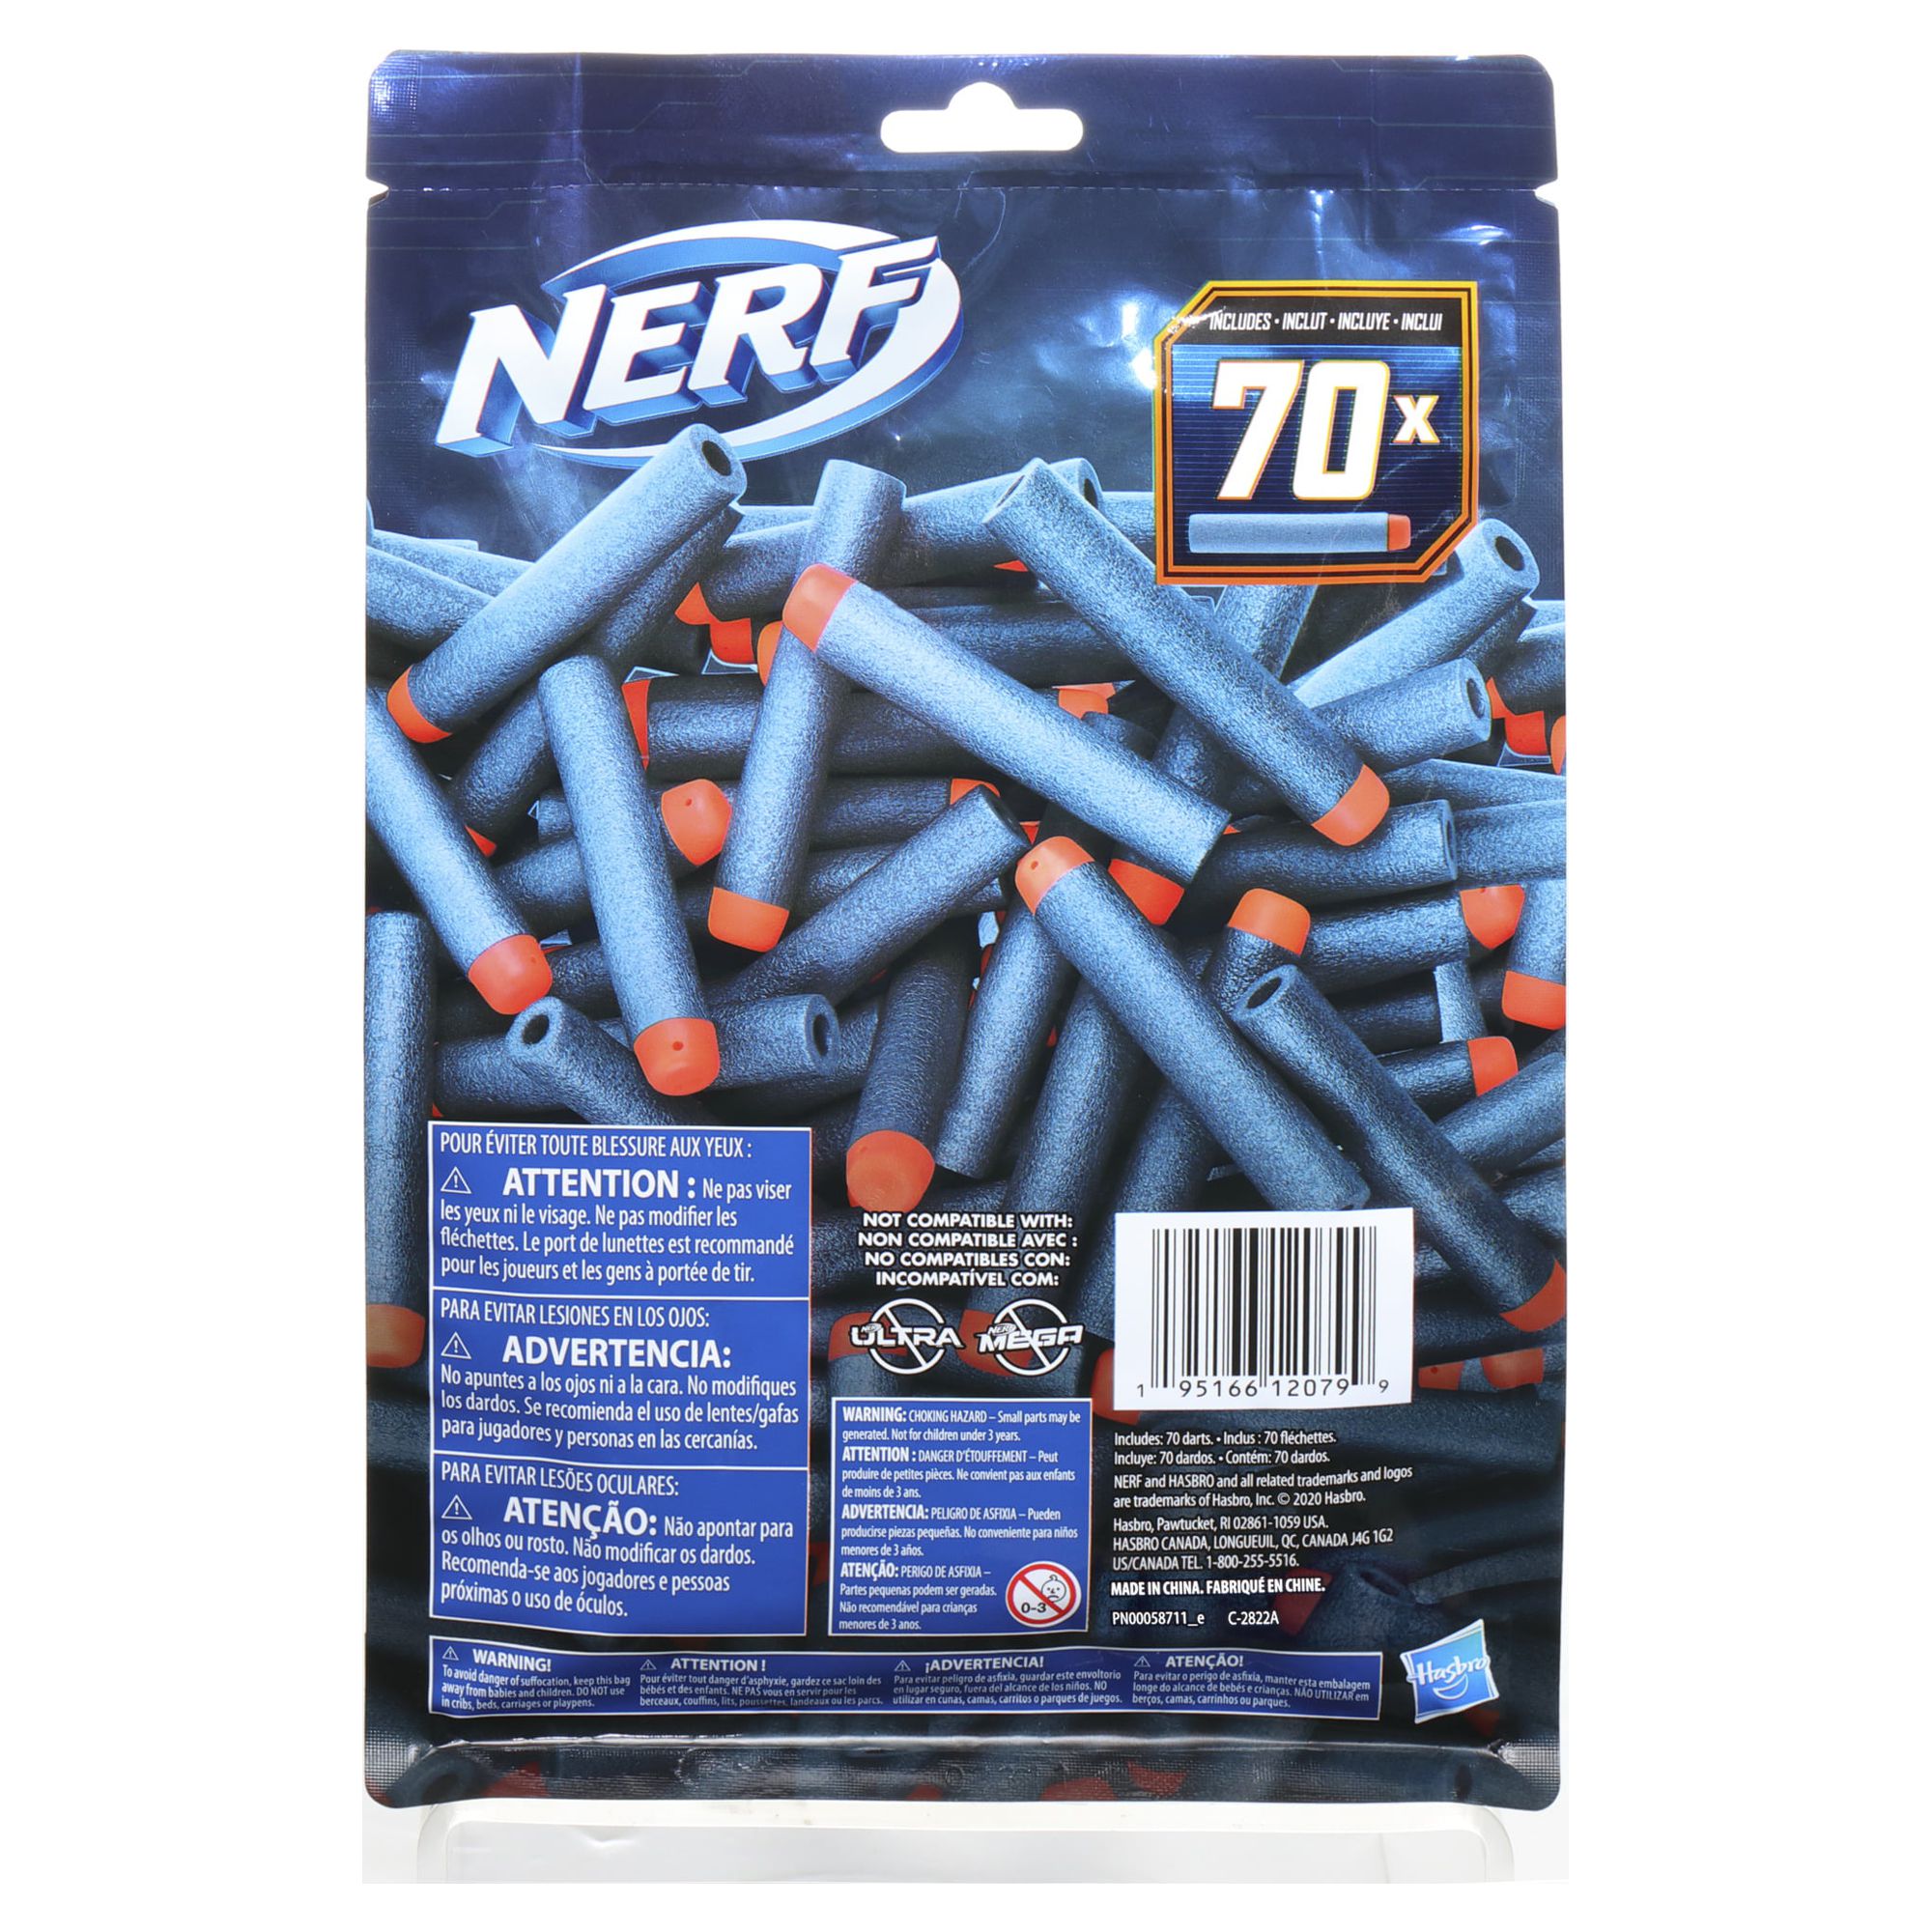 Nerf Elite 2.0 Kids Toy Blaster Refill Pack with 70 Darts, Only At Walmart - image 4 of 4